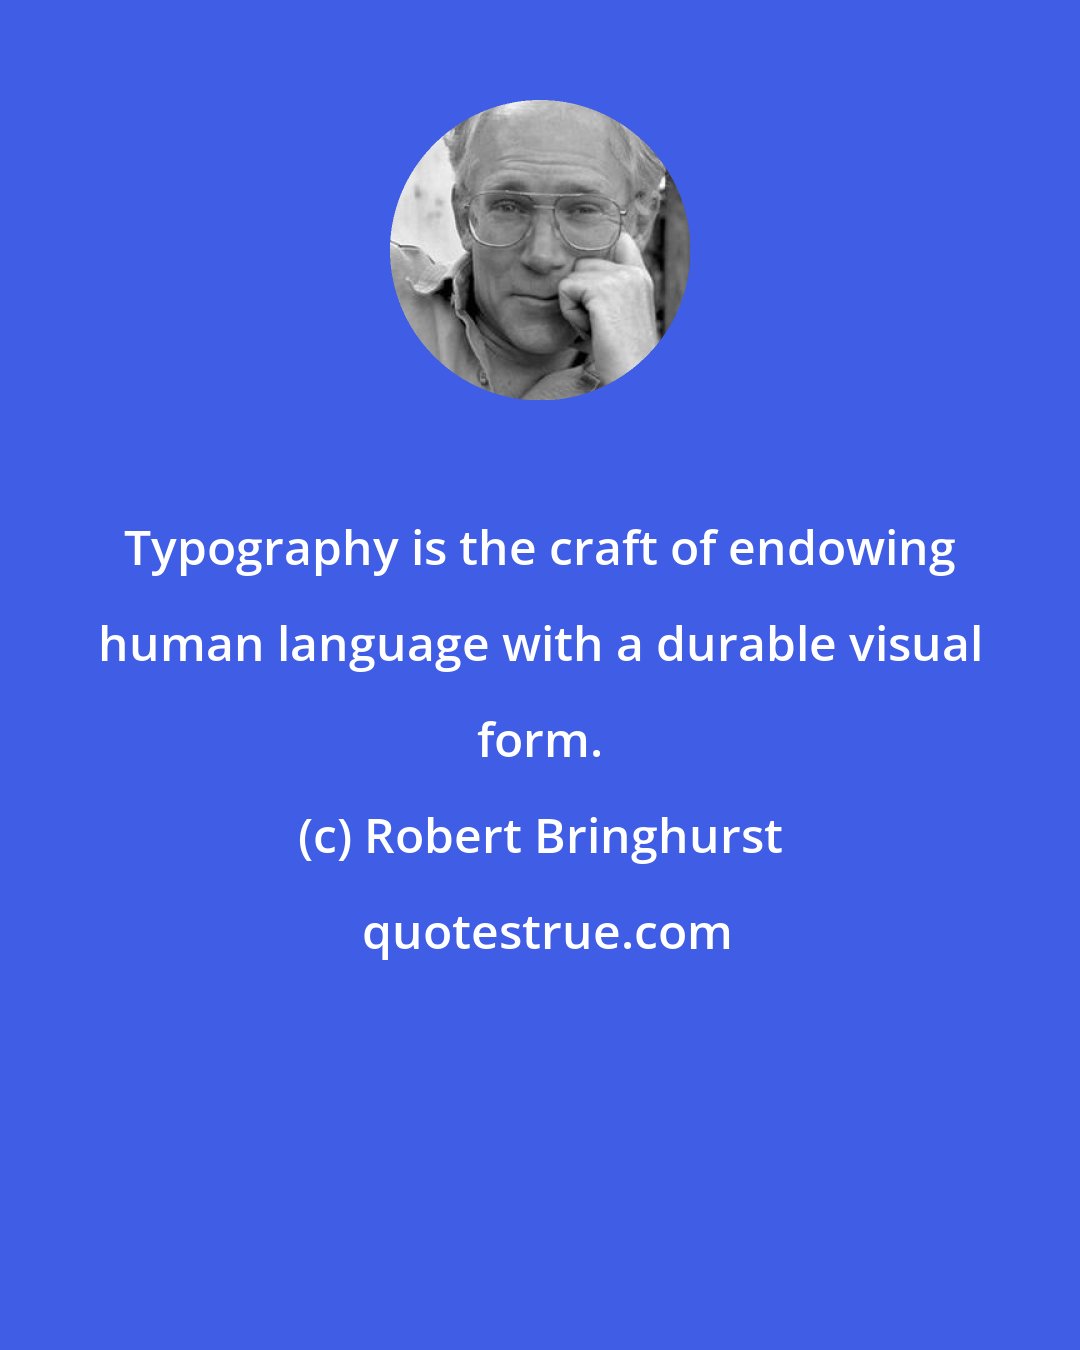 Robert Bringhurst: Typography is the craft of endowing human language with a durable visual form.